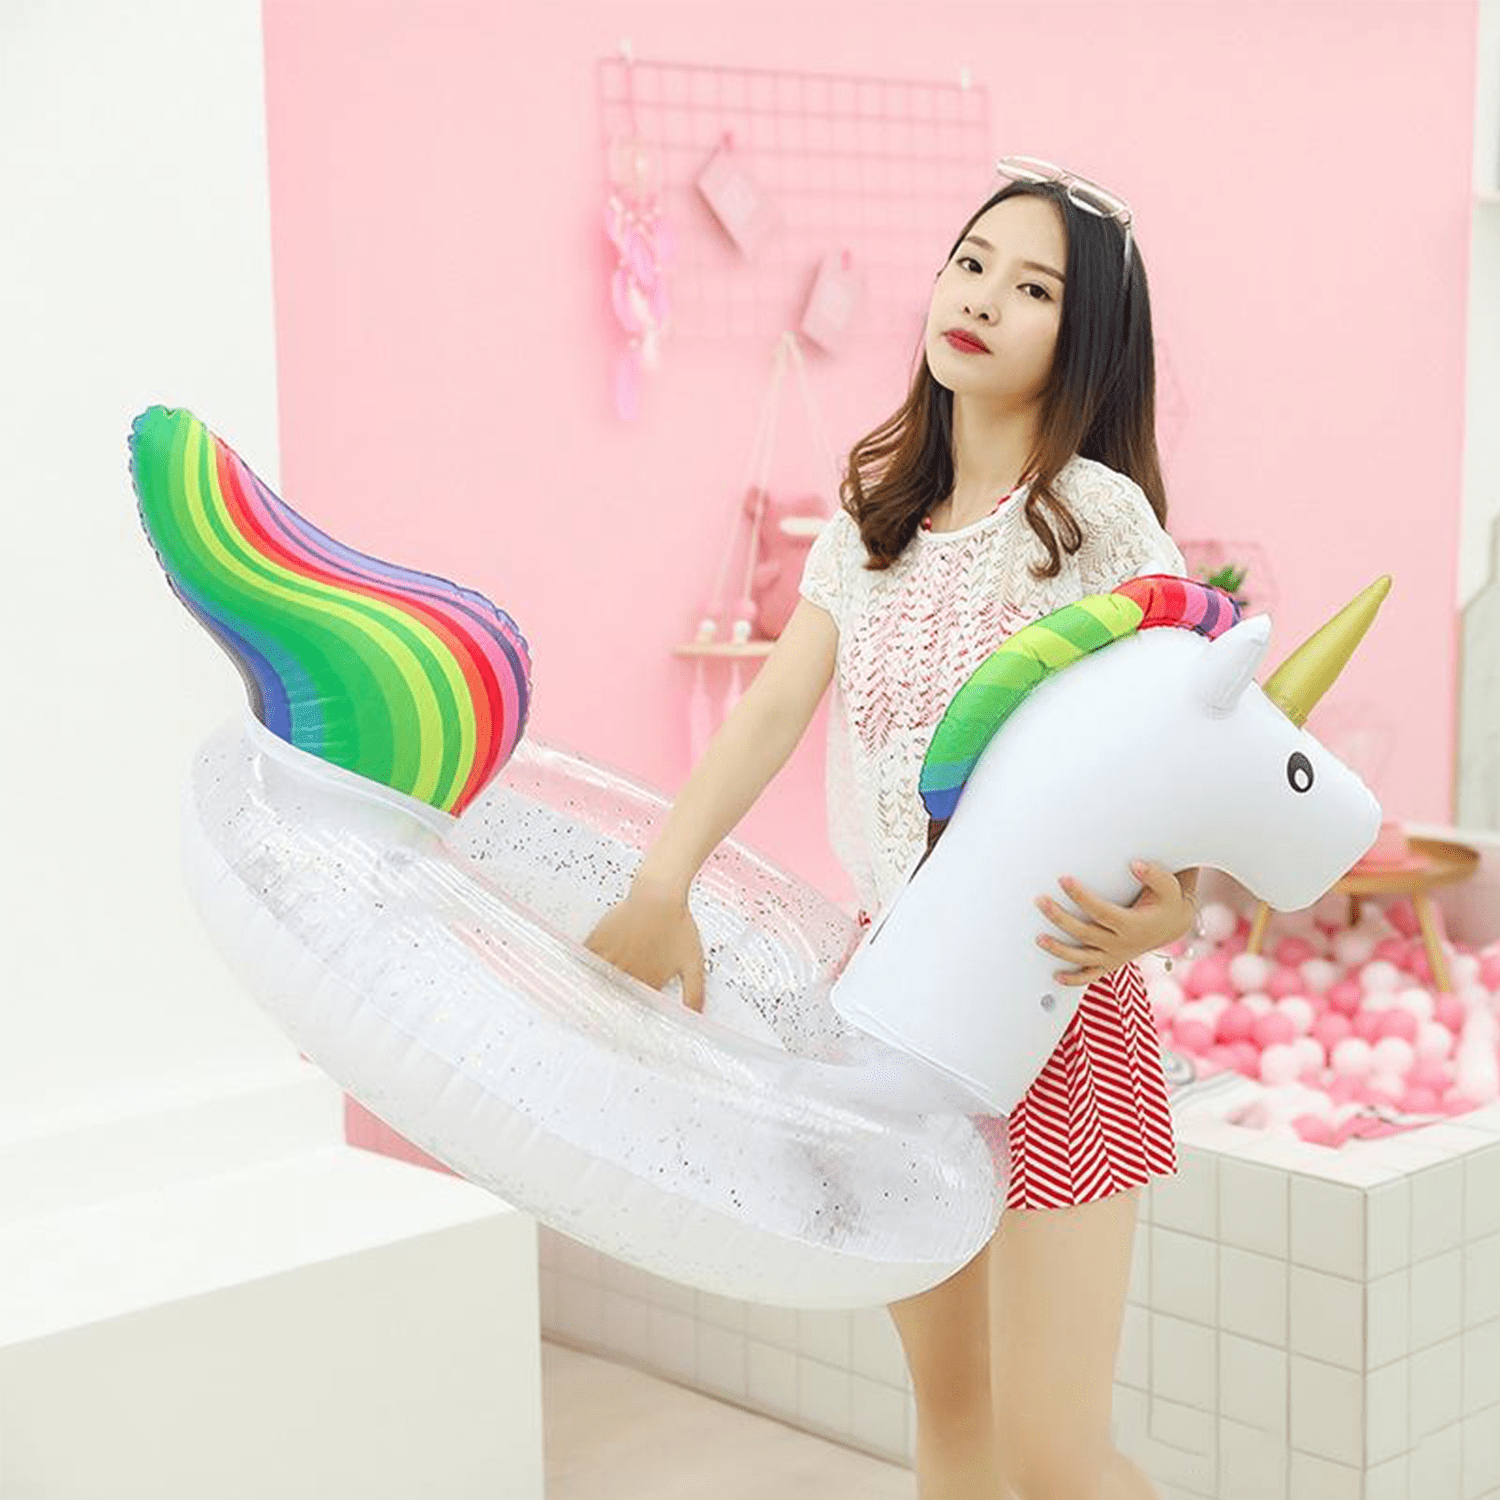 79" Giant Inflatable Unicorn Water Float Raft Ride On Pool Lounger Beach Toy 